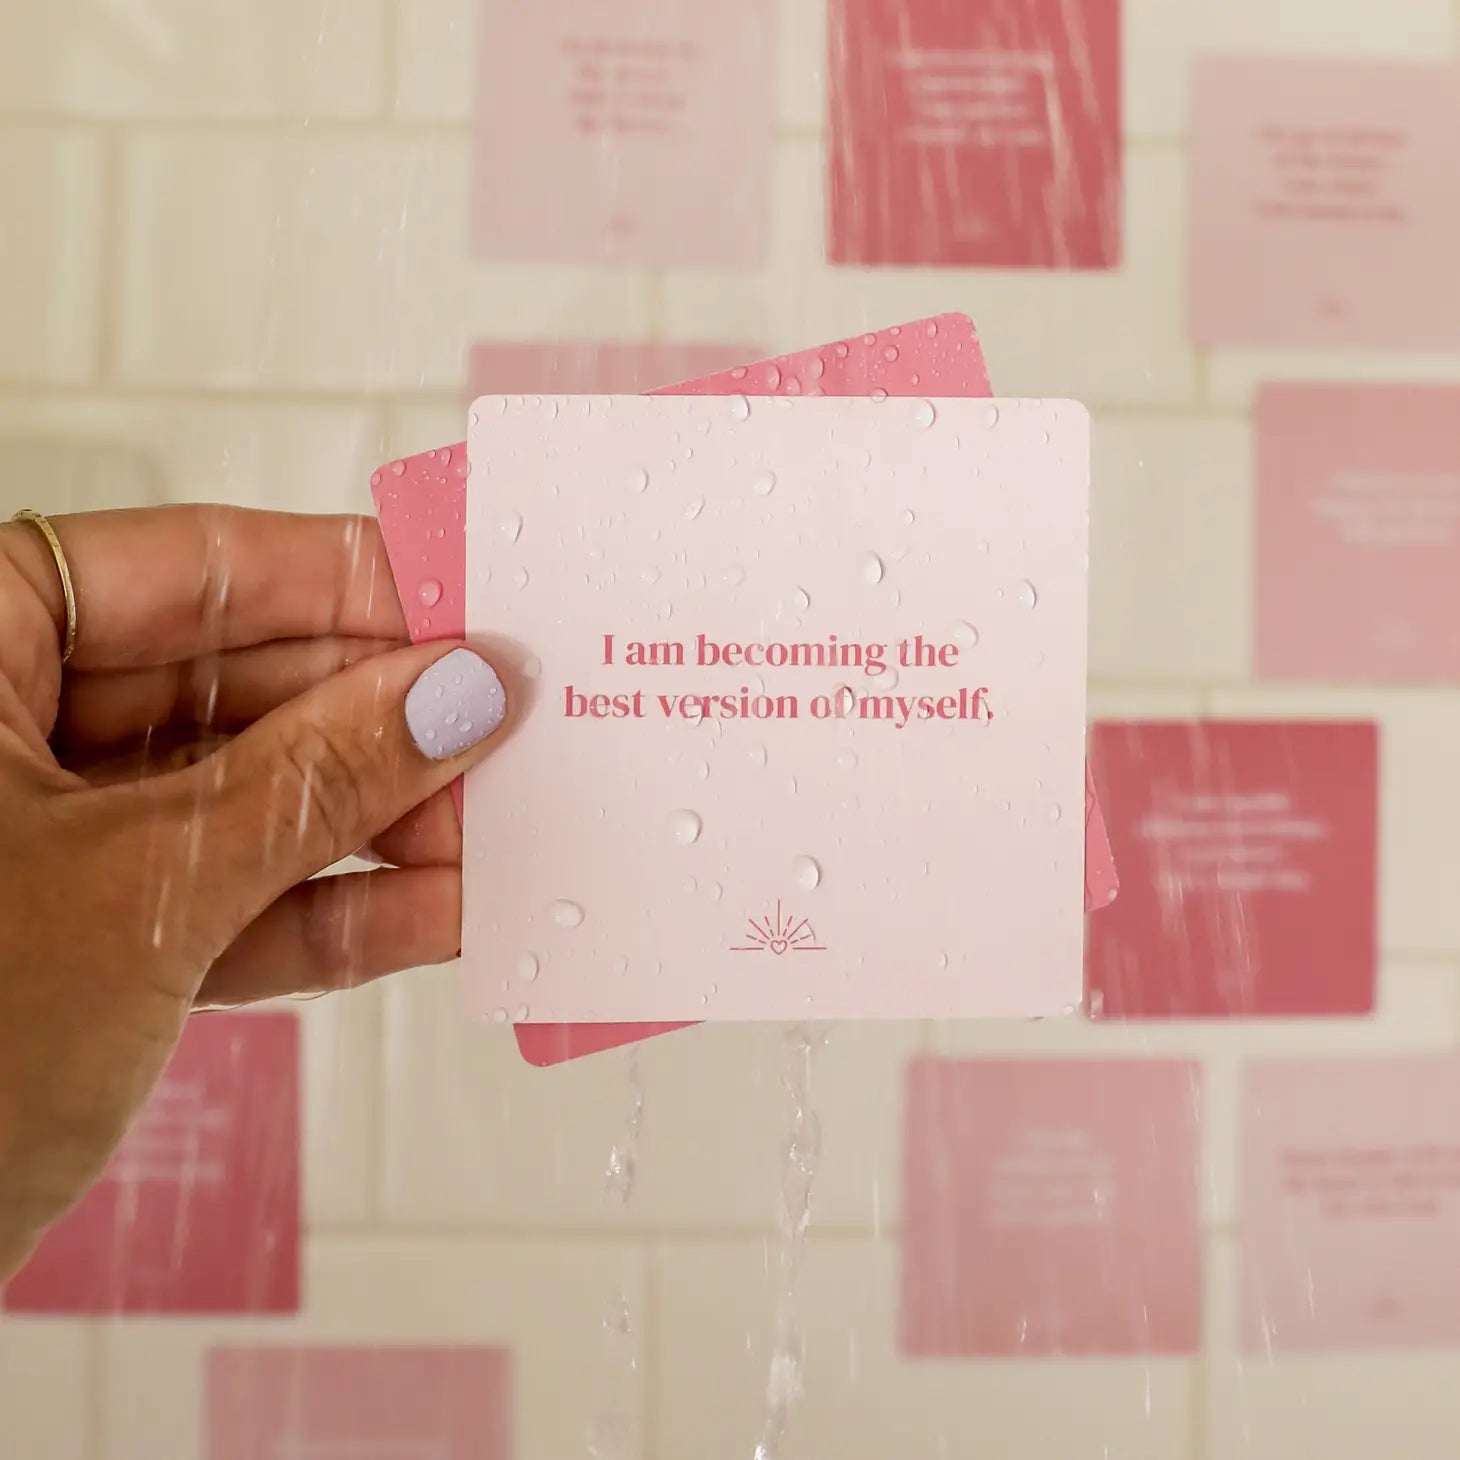 Different tones of pink cards that each have an uplifting affirmation on them for you to read and stick on the walls of your shower.